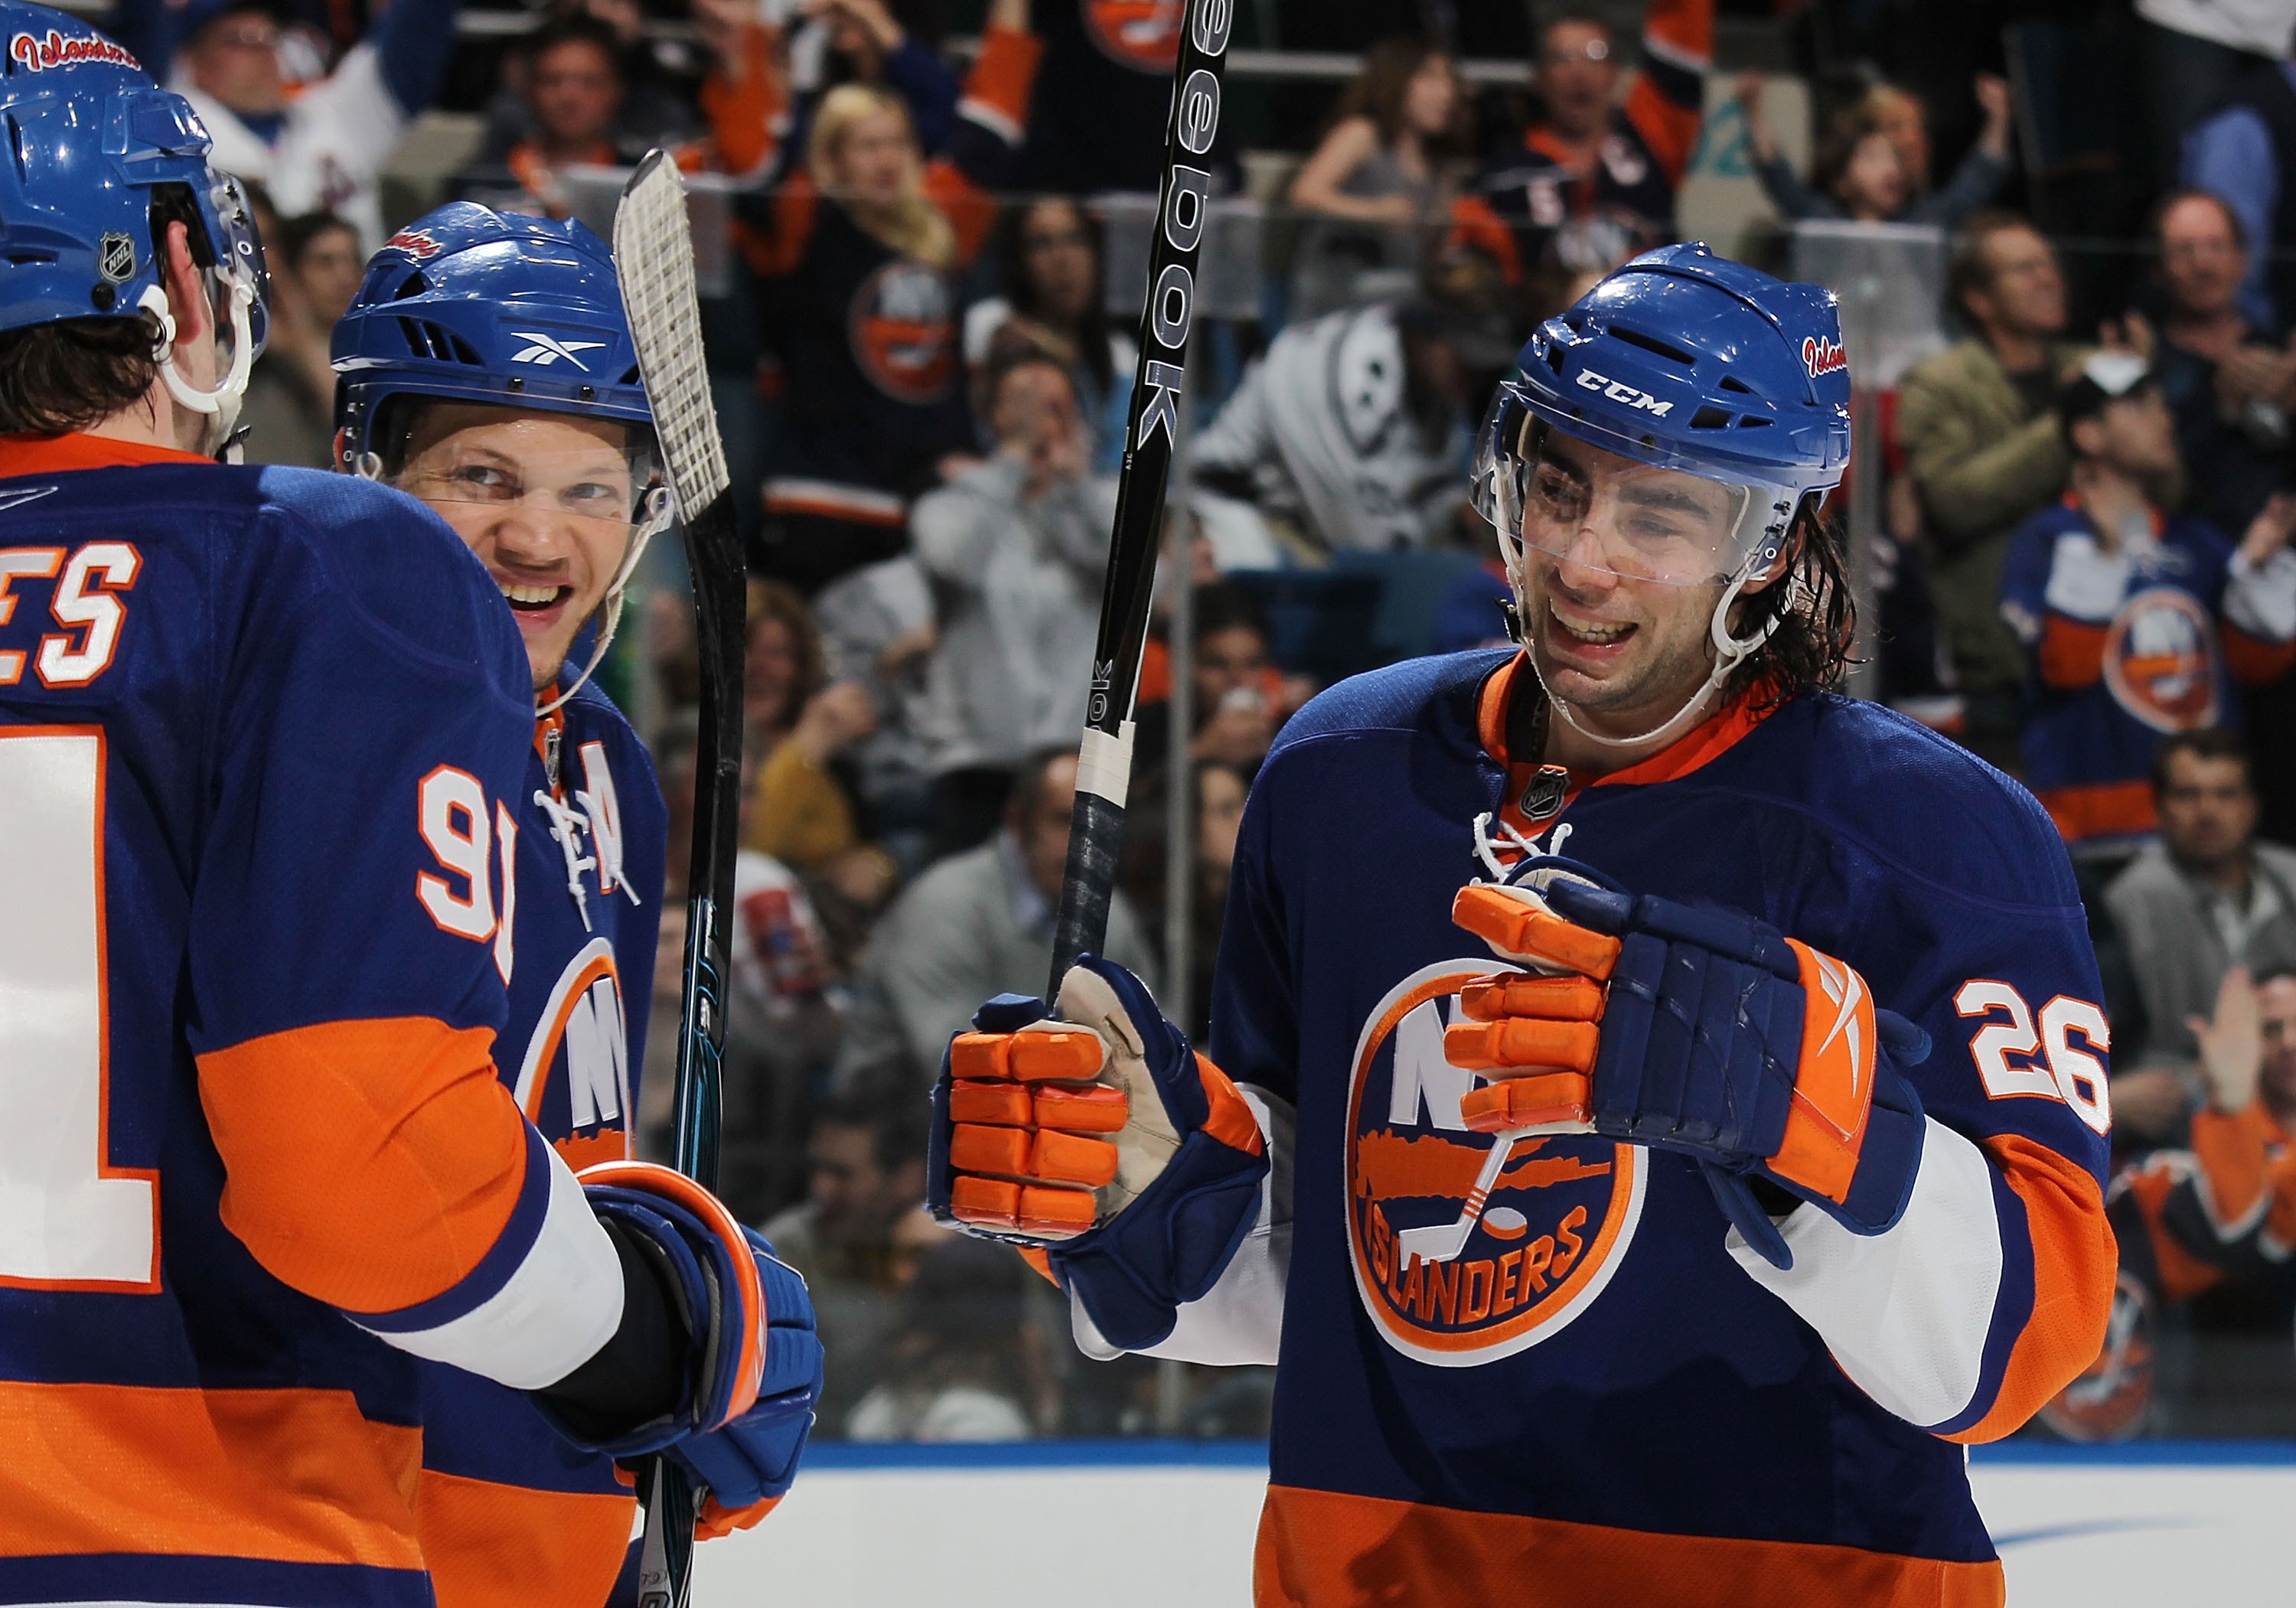 UNIONDALE, NY - APRIL 11:  Matt Moulson #26 of the New York Islanders celebrates his 30th goal of the season against the Pittsburgh Penguins at the Nassau Coliseum on April 11, 2010 in Uniondale, New York.  (Photo by Bruce Bennett/Getty Images)